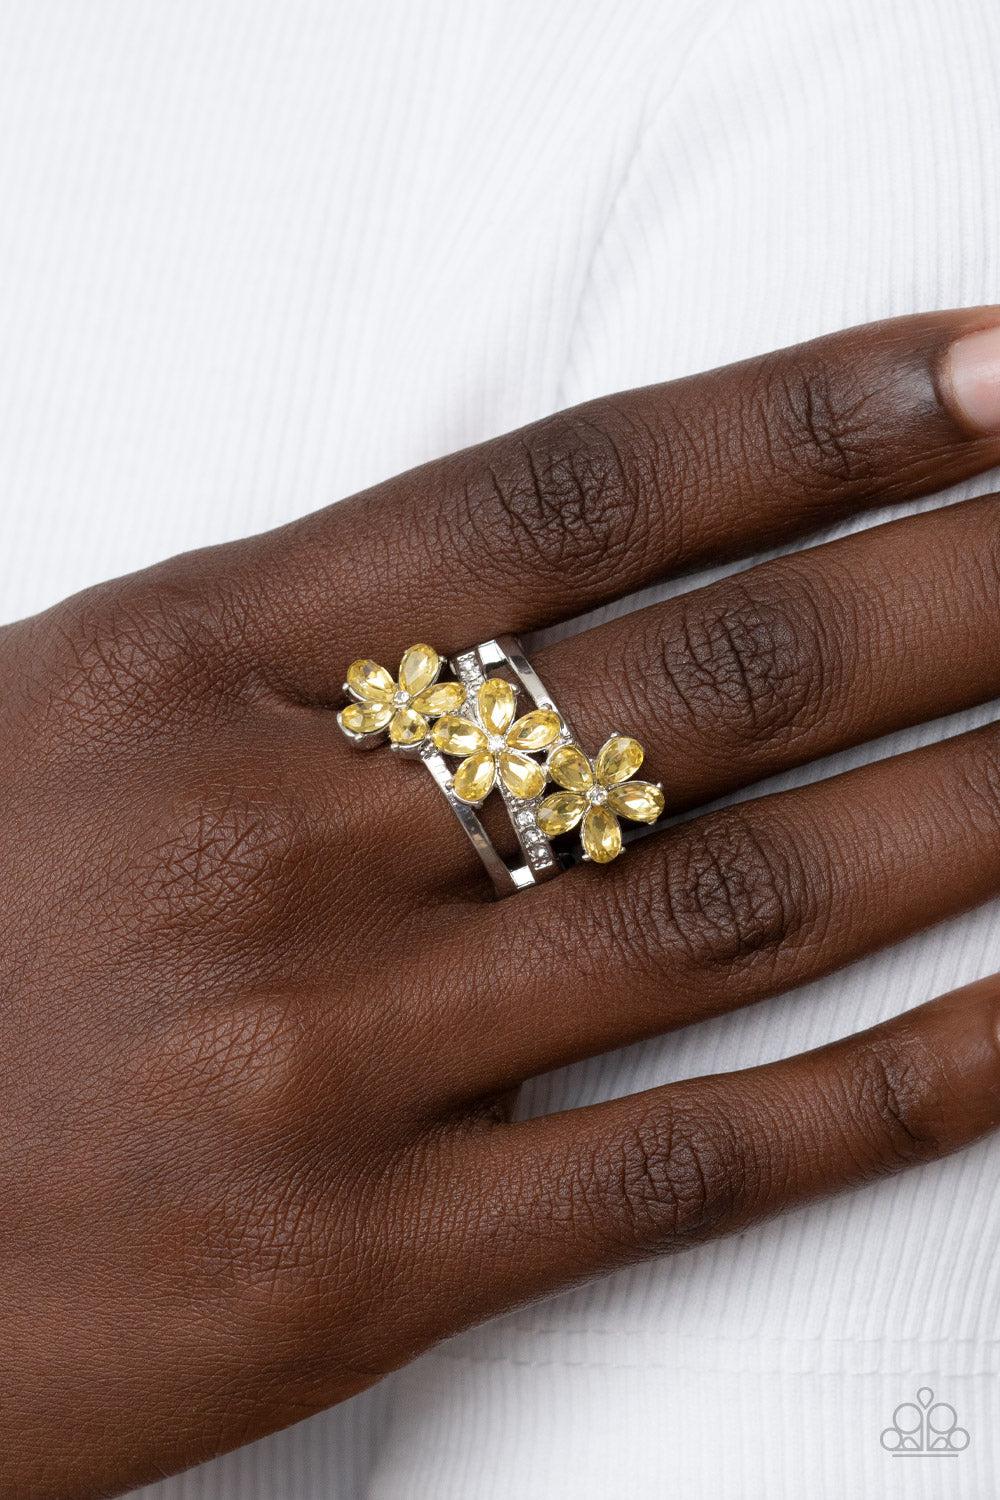 Posh Petals Yellow Flower Ring - Paparazzi Accessories-on model - CarasShop.com - $5 Jewelry by Cara Jewels